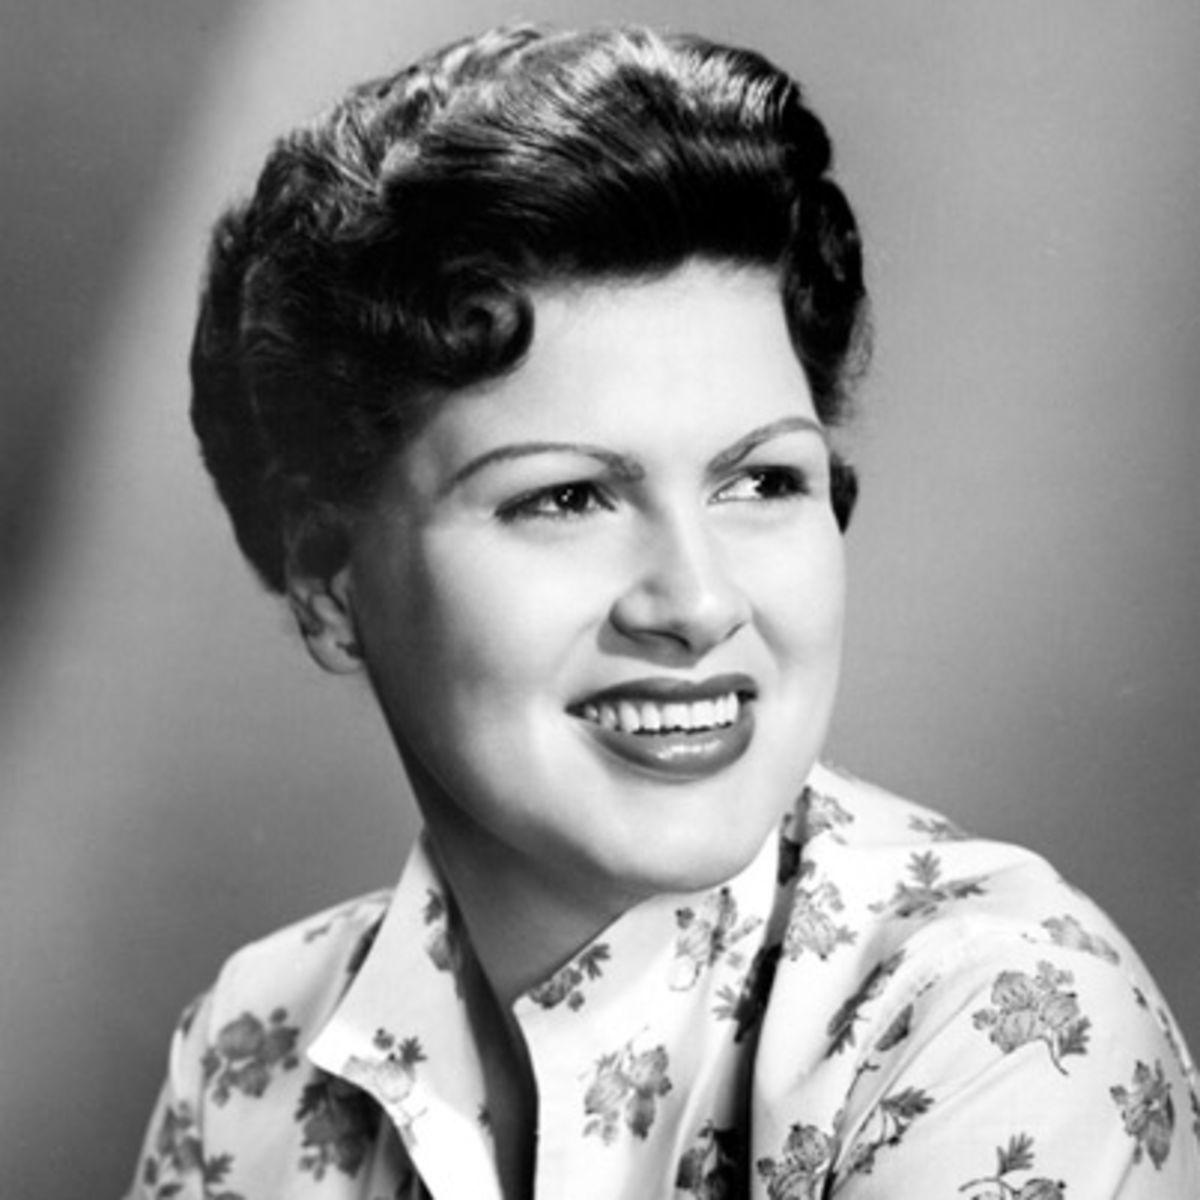 MUSIC TIP: PATSY CLINE